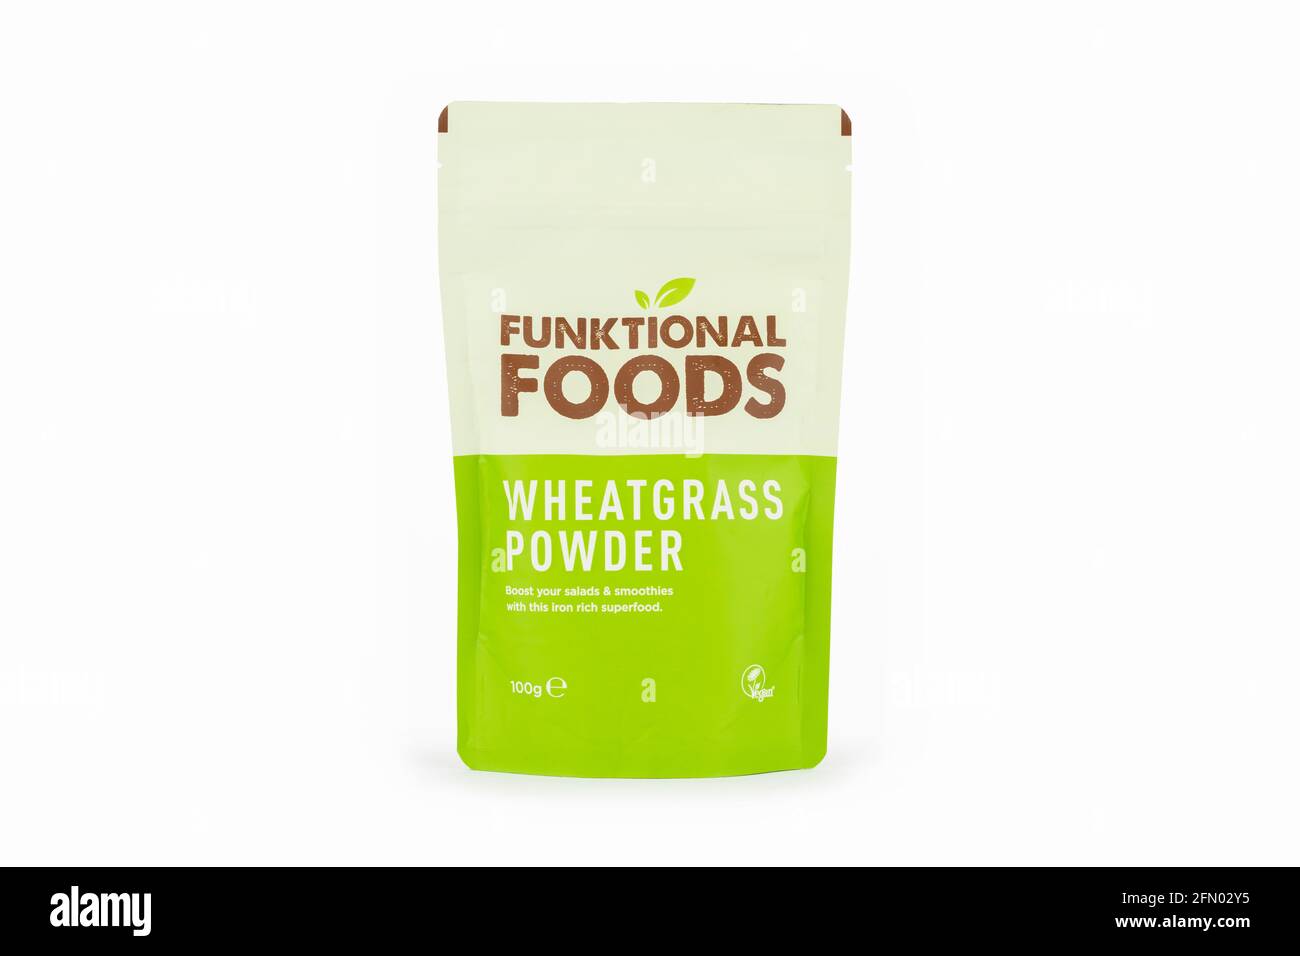 A packet of Funktional Foods wheatgrass powder shot on a white background. Stock Photo